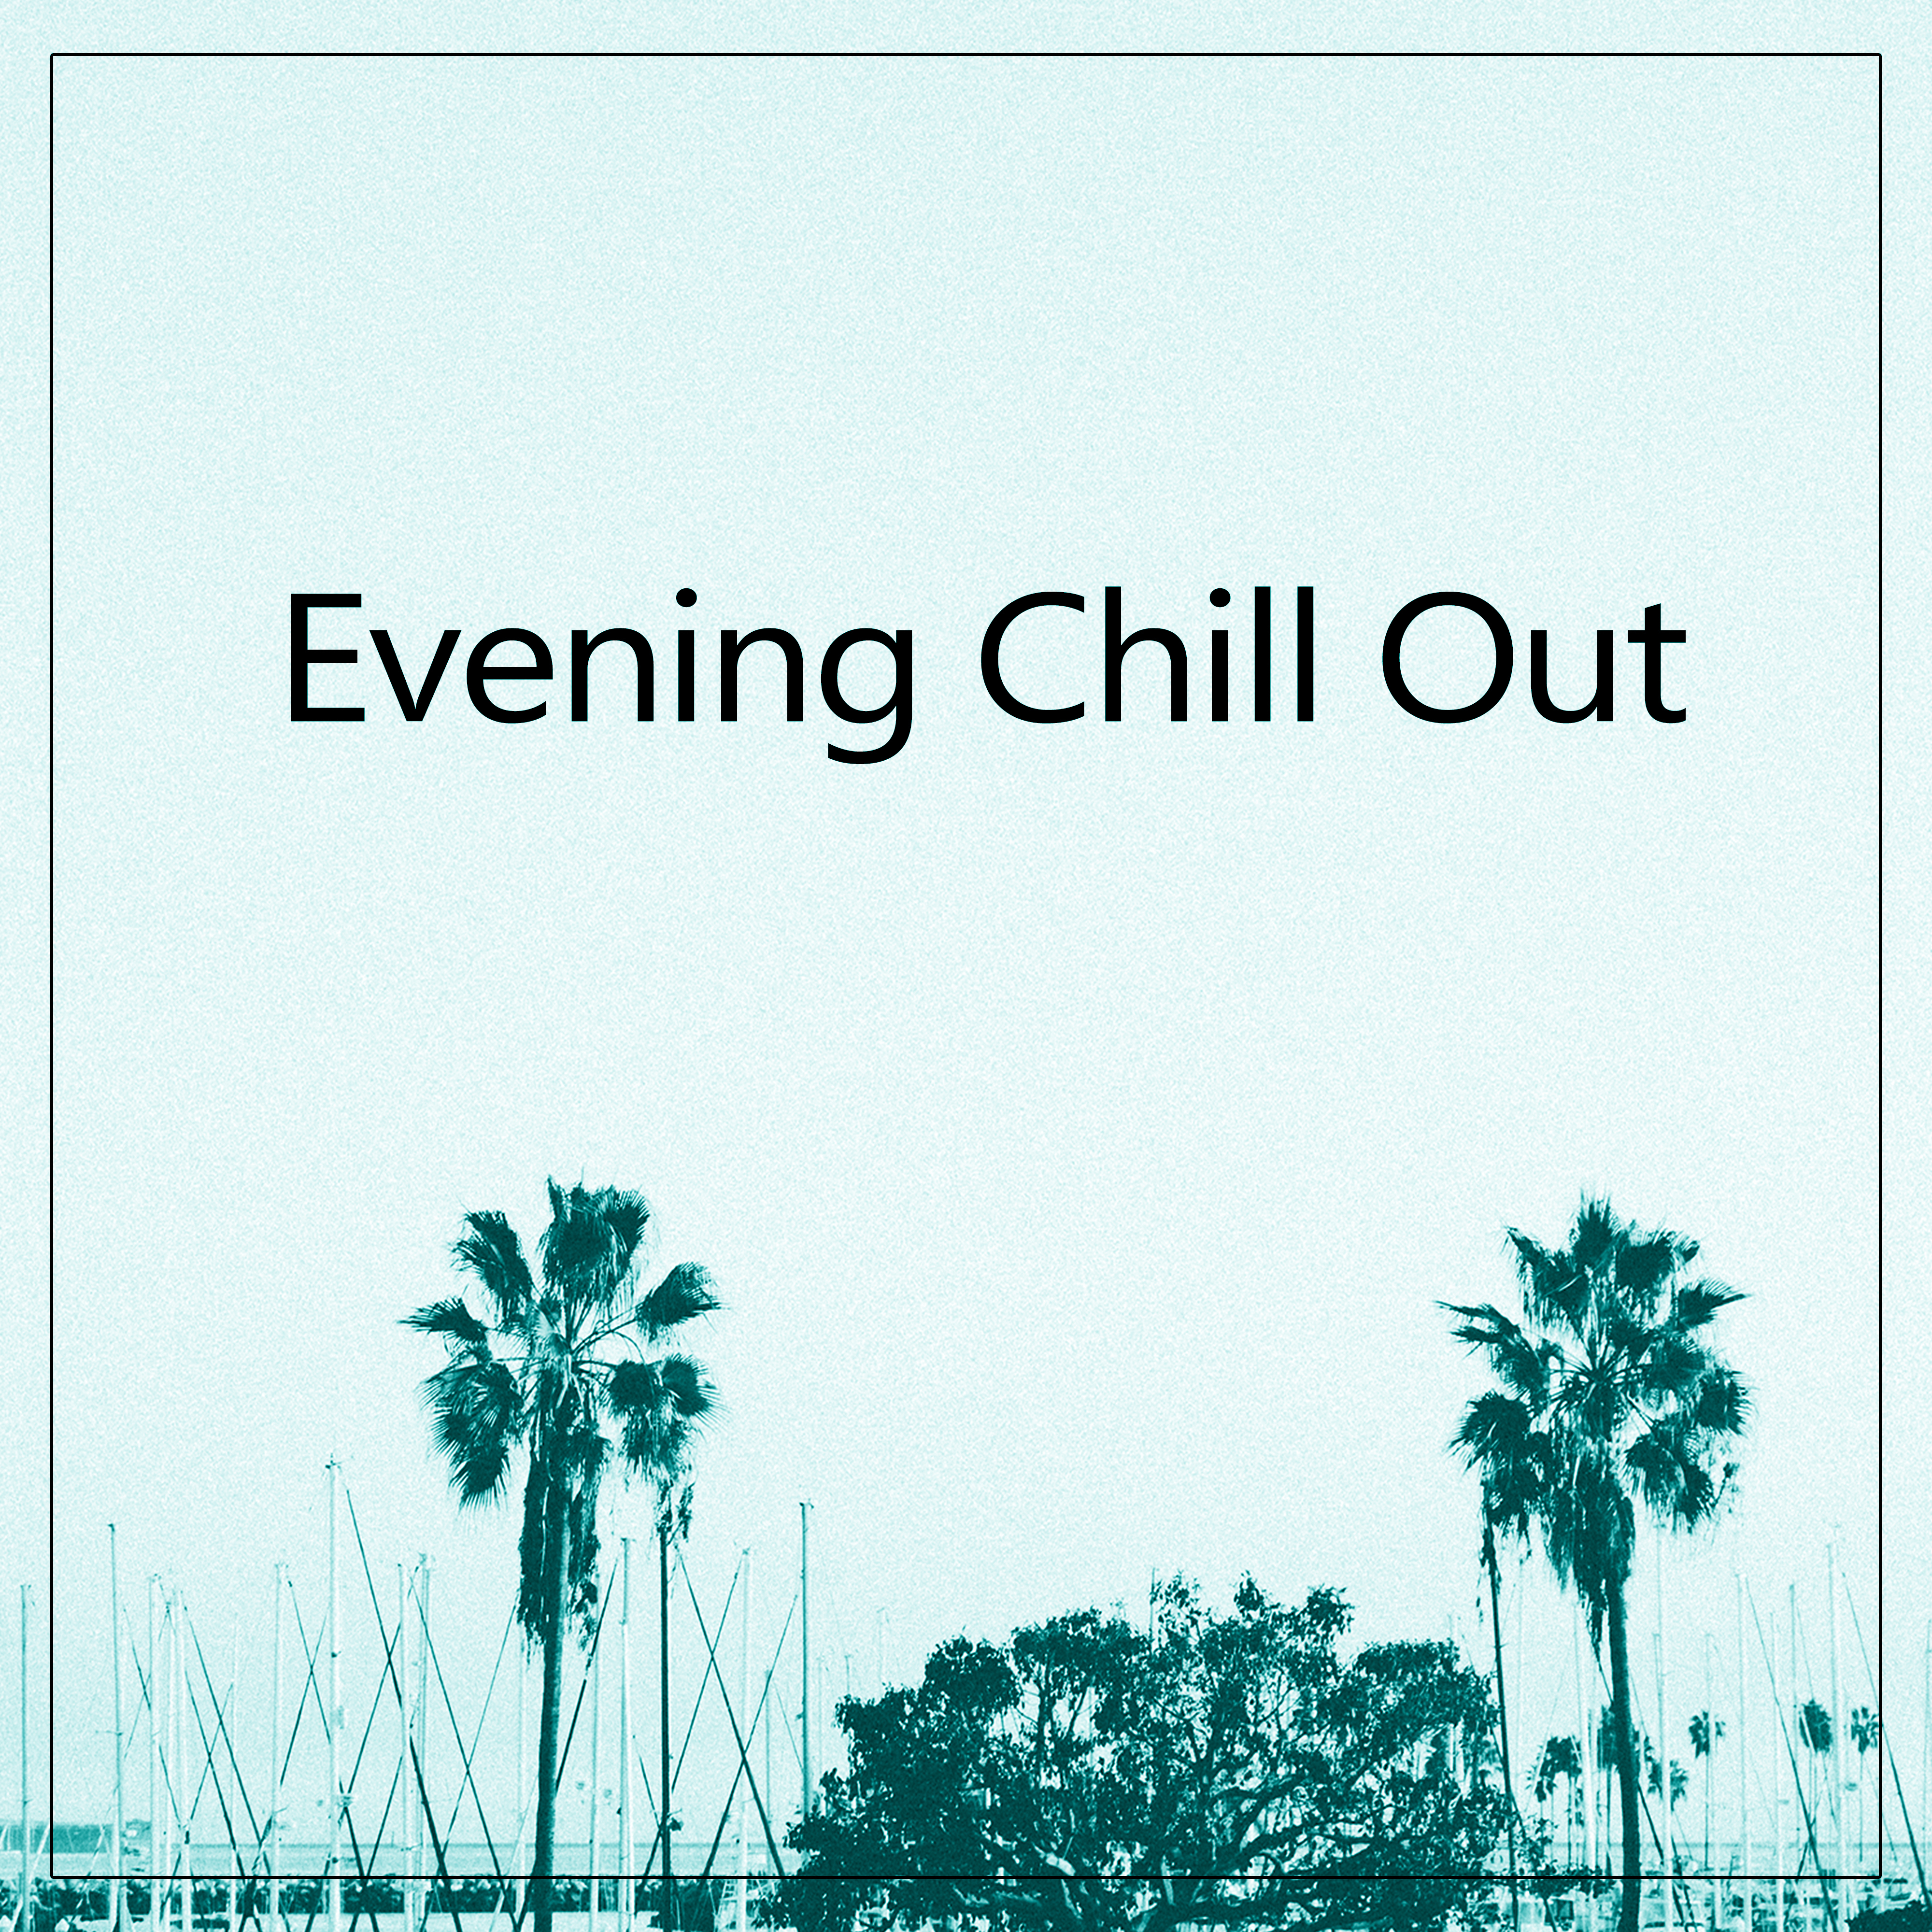 Evening Chill Out – Late Chill Out, Relaxing Chillout, Chill Out for Sleep